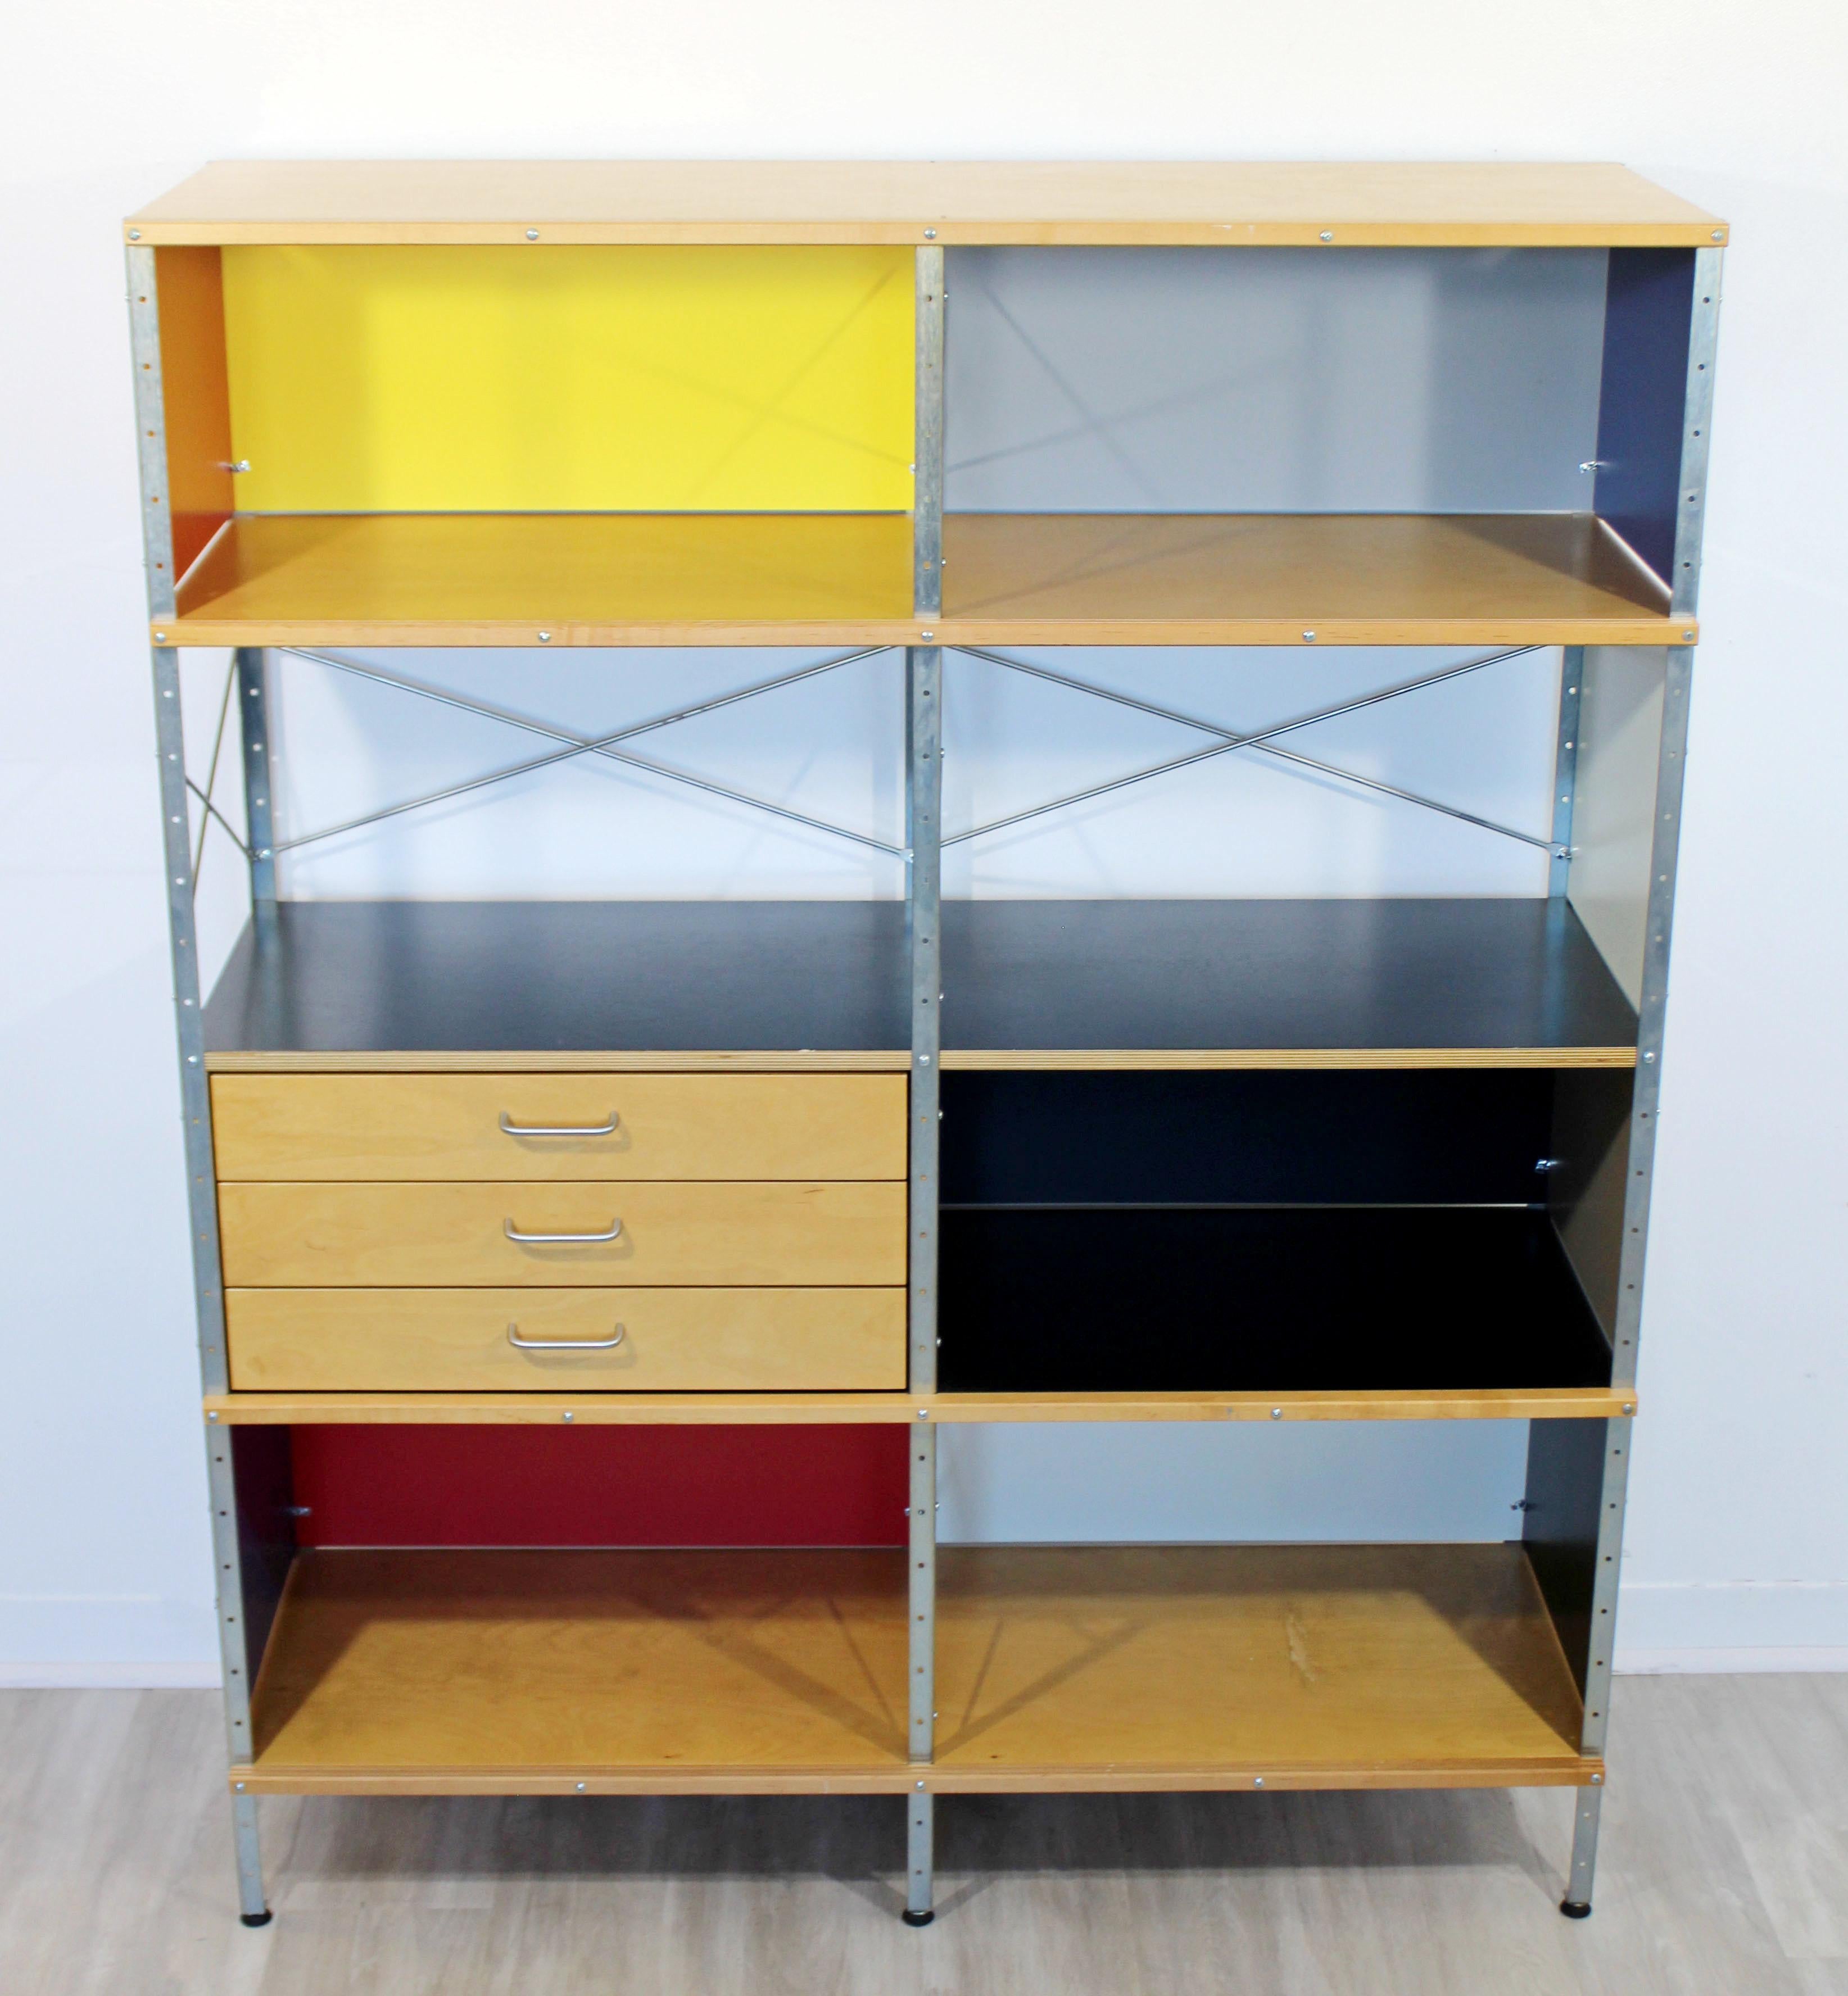 For your consideration is an incredibly fun, 4 x 2 storage shelving unit, with three drawers and seven shelves, by Herman Miller, circa 2000. In very good condition. The dimensions are 47.5